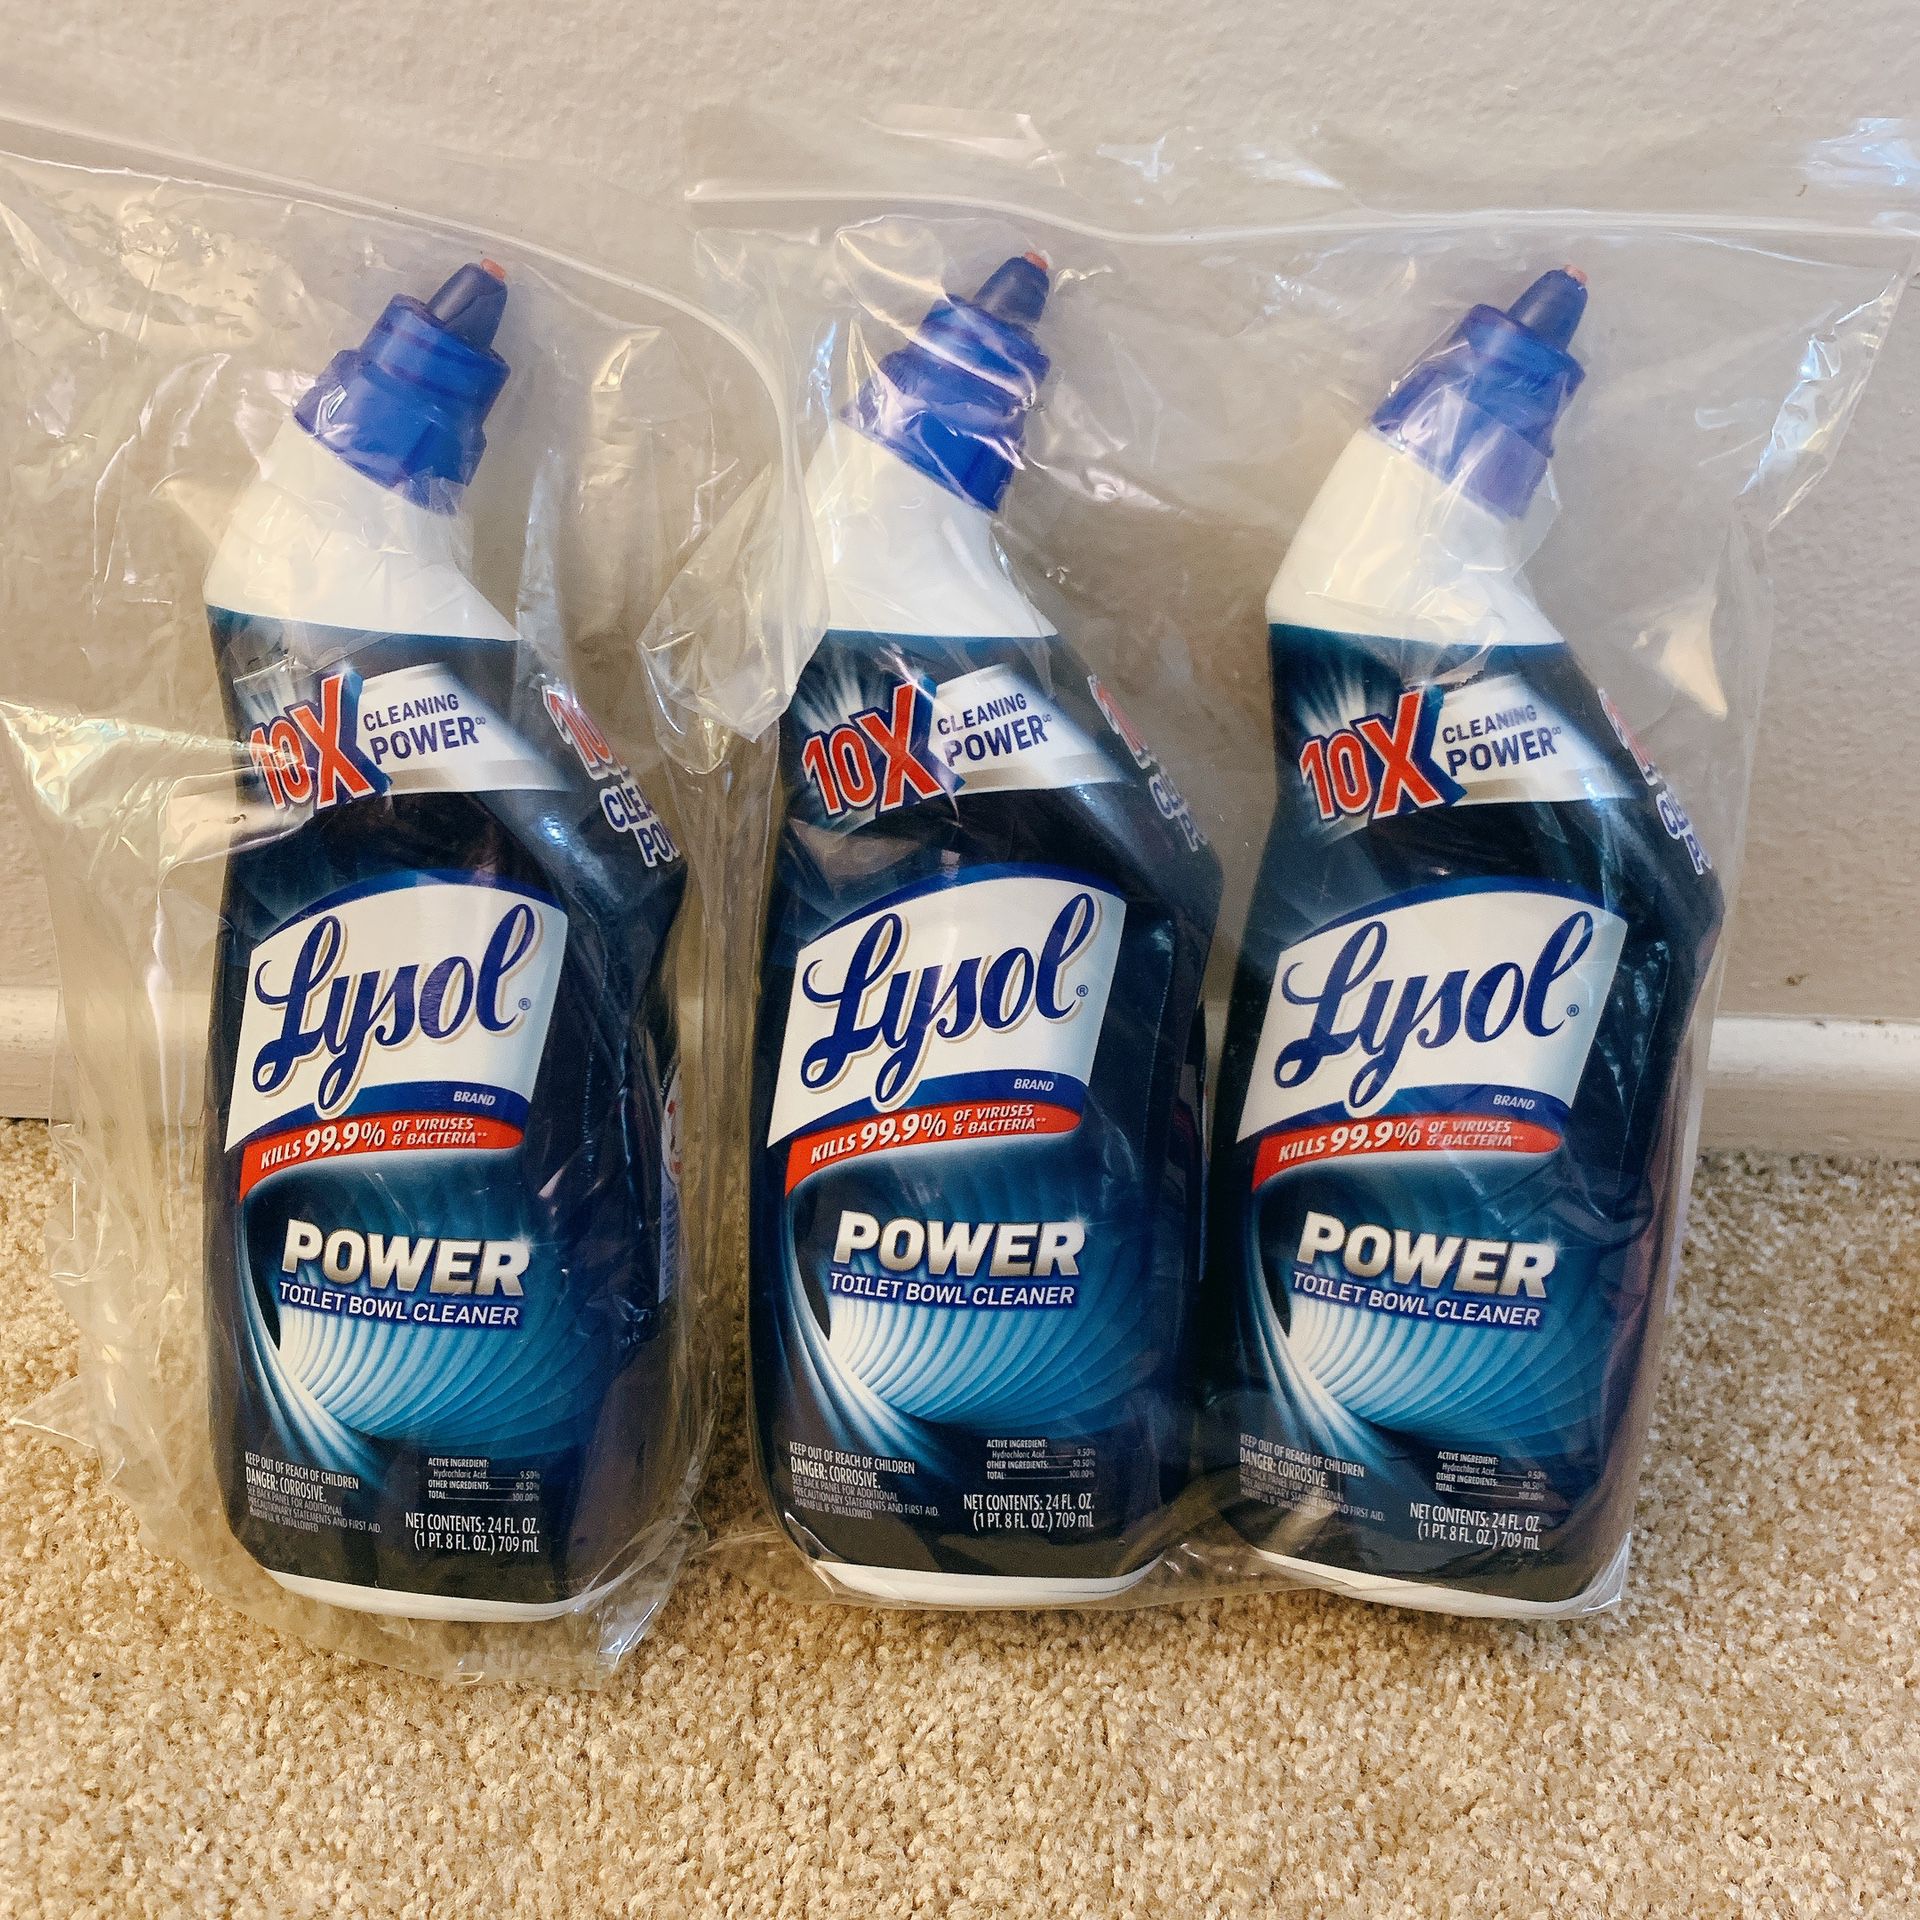 LYSOL Power Toilet Bowl Cleaner, pack of 3